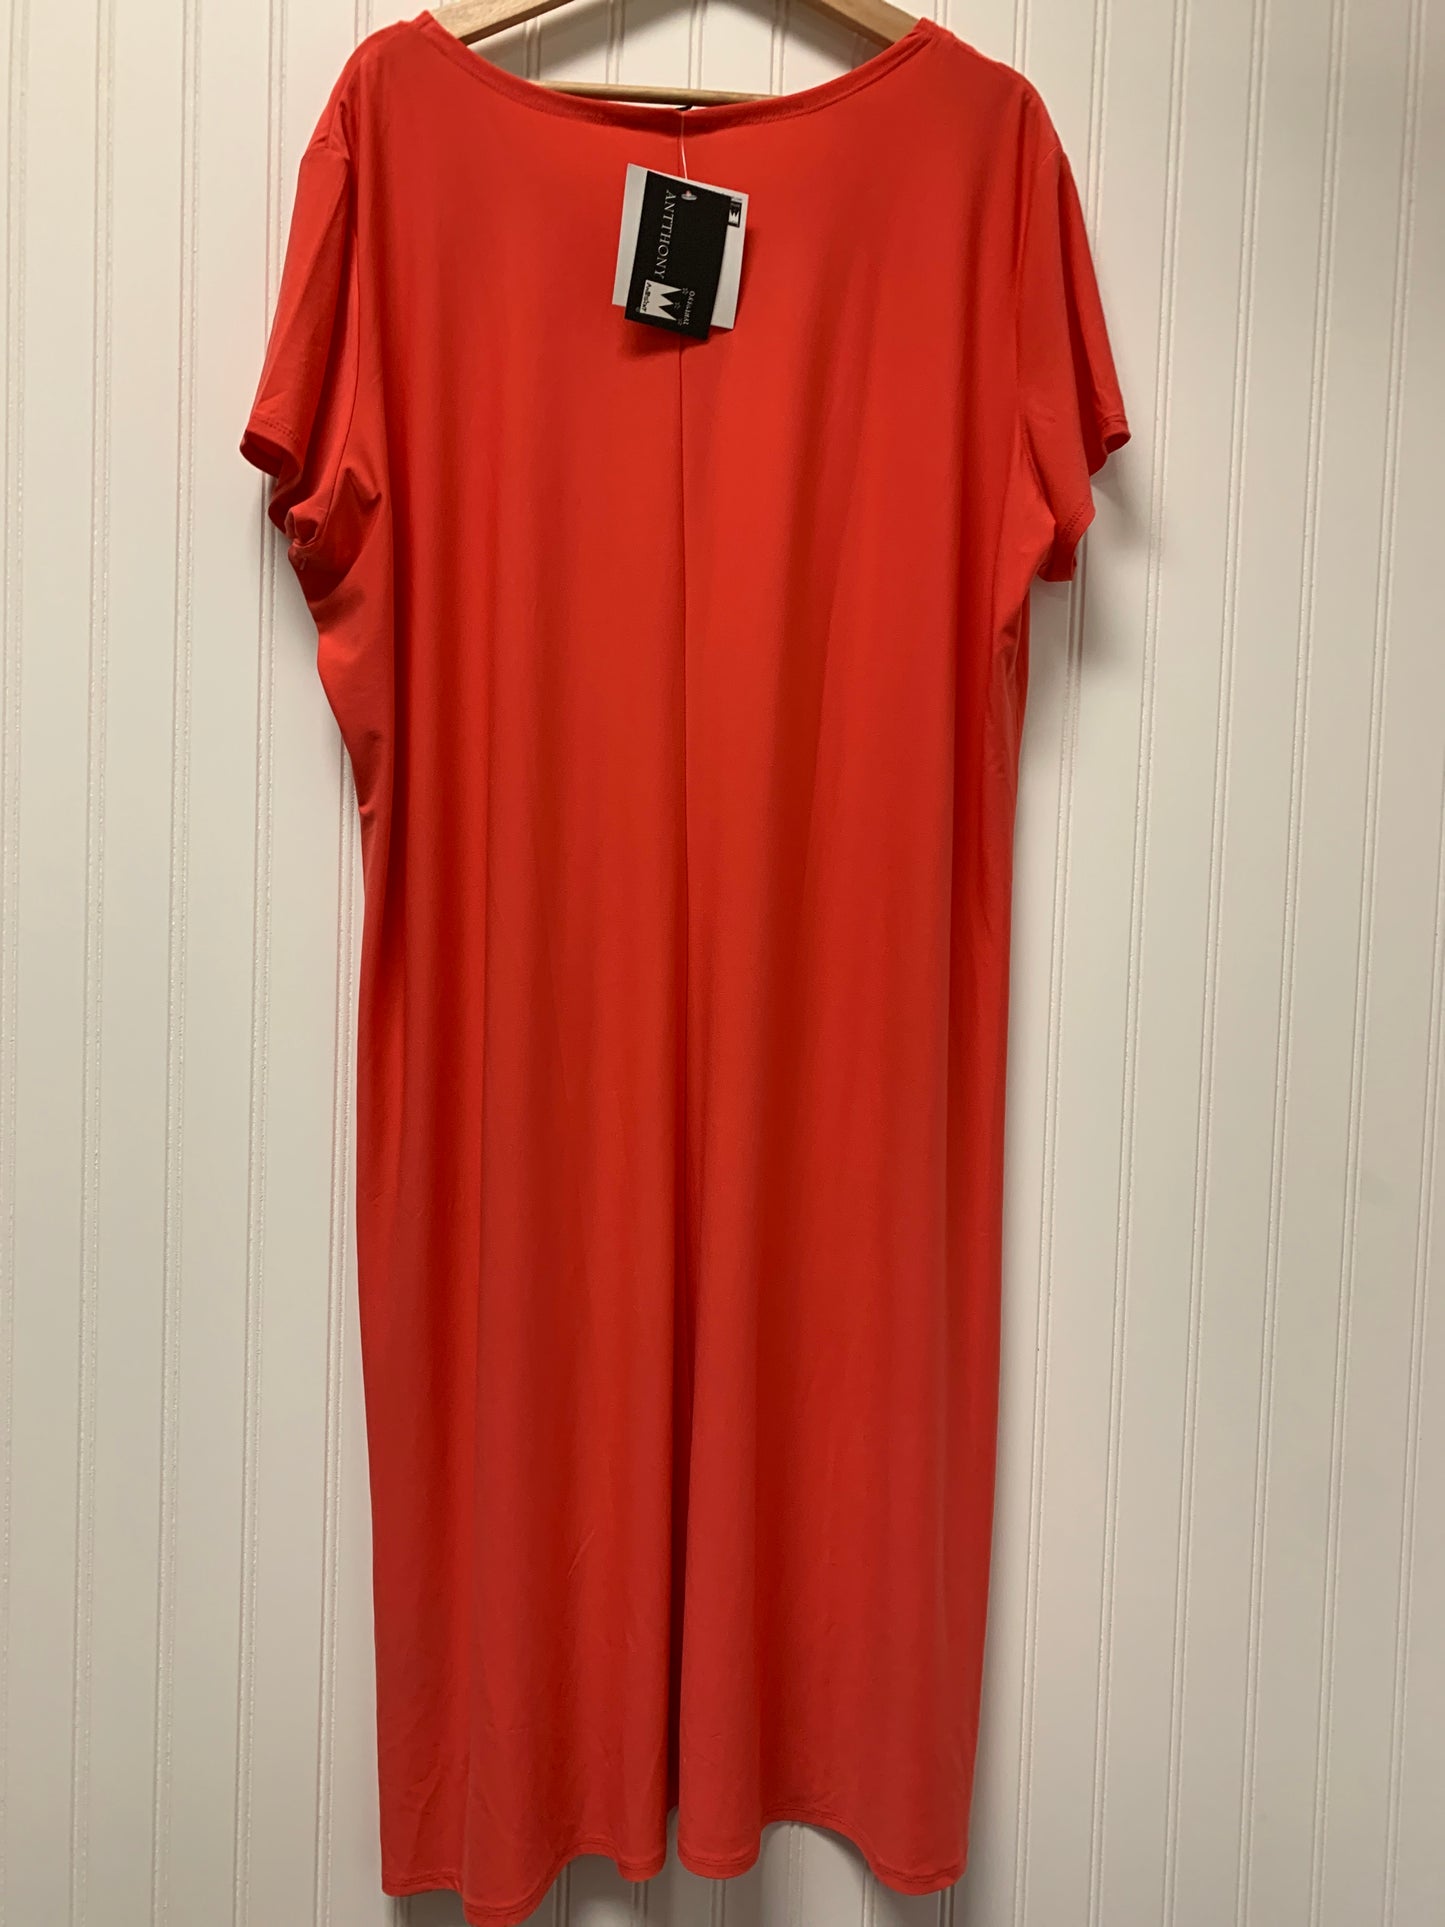 Dress Casual Midi By Clothes Mentor  Size: 2x